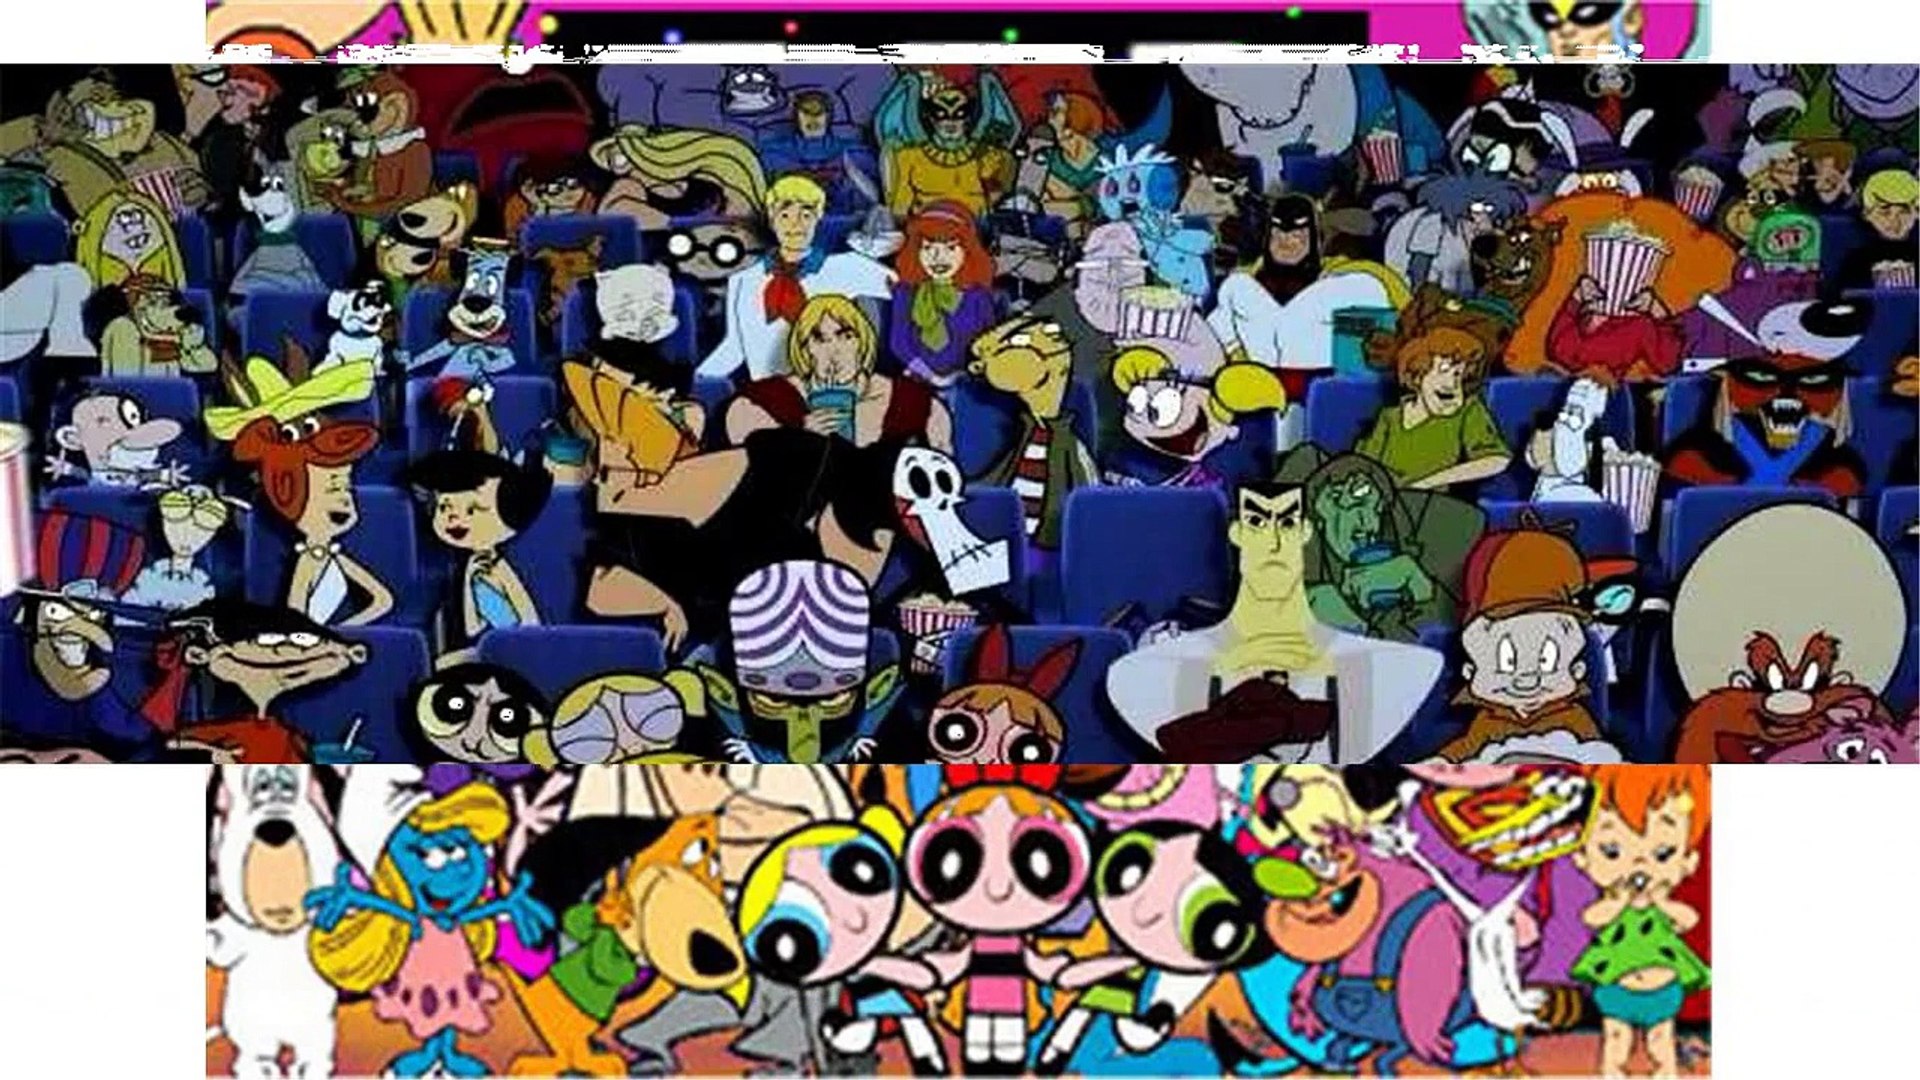 cartoon network old shows - video Dailymotion